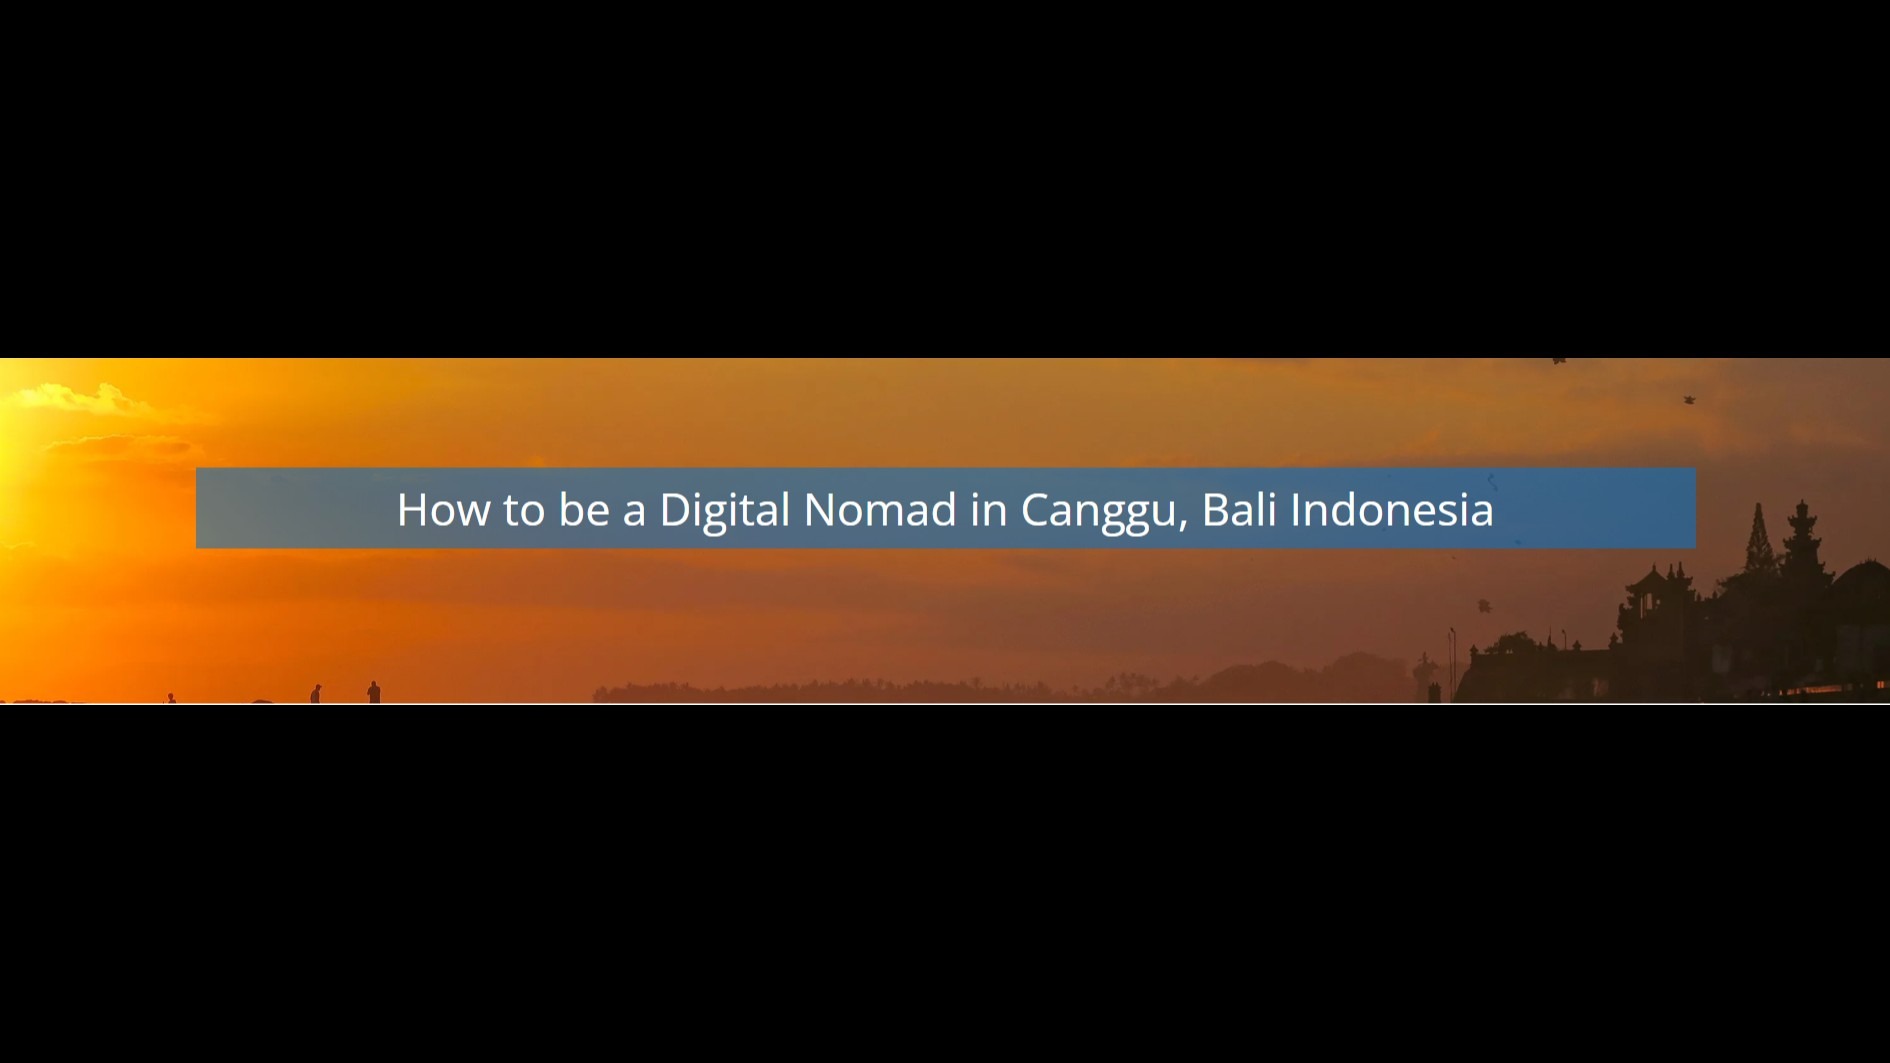 Plan Your Working Holiday In Canggu With This Digital Nomad Tourism Guide